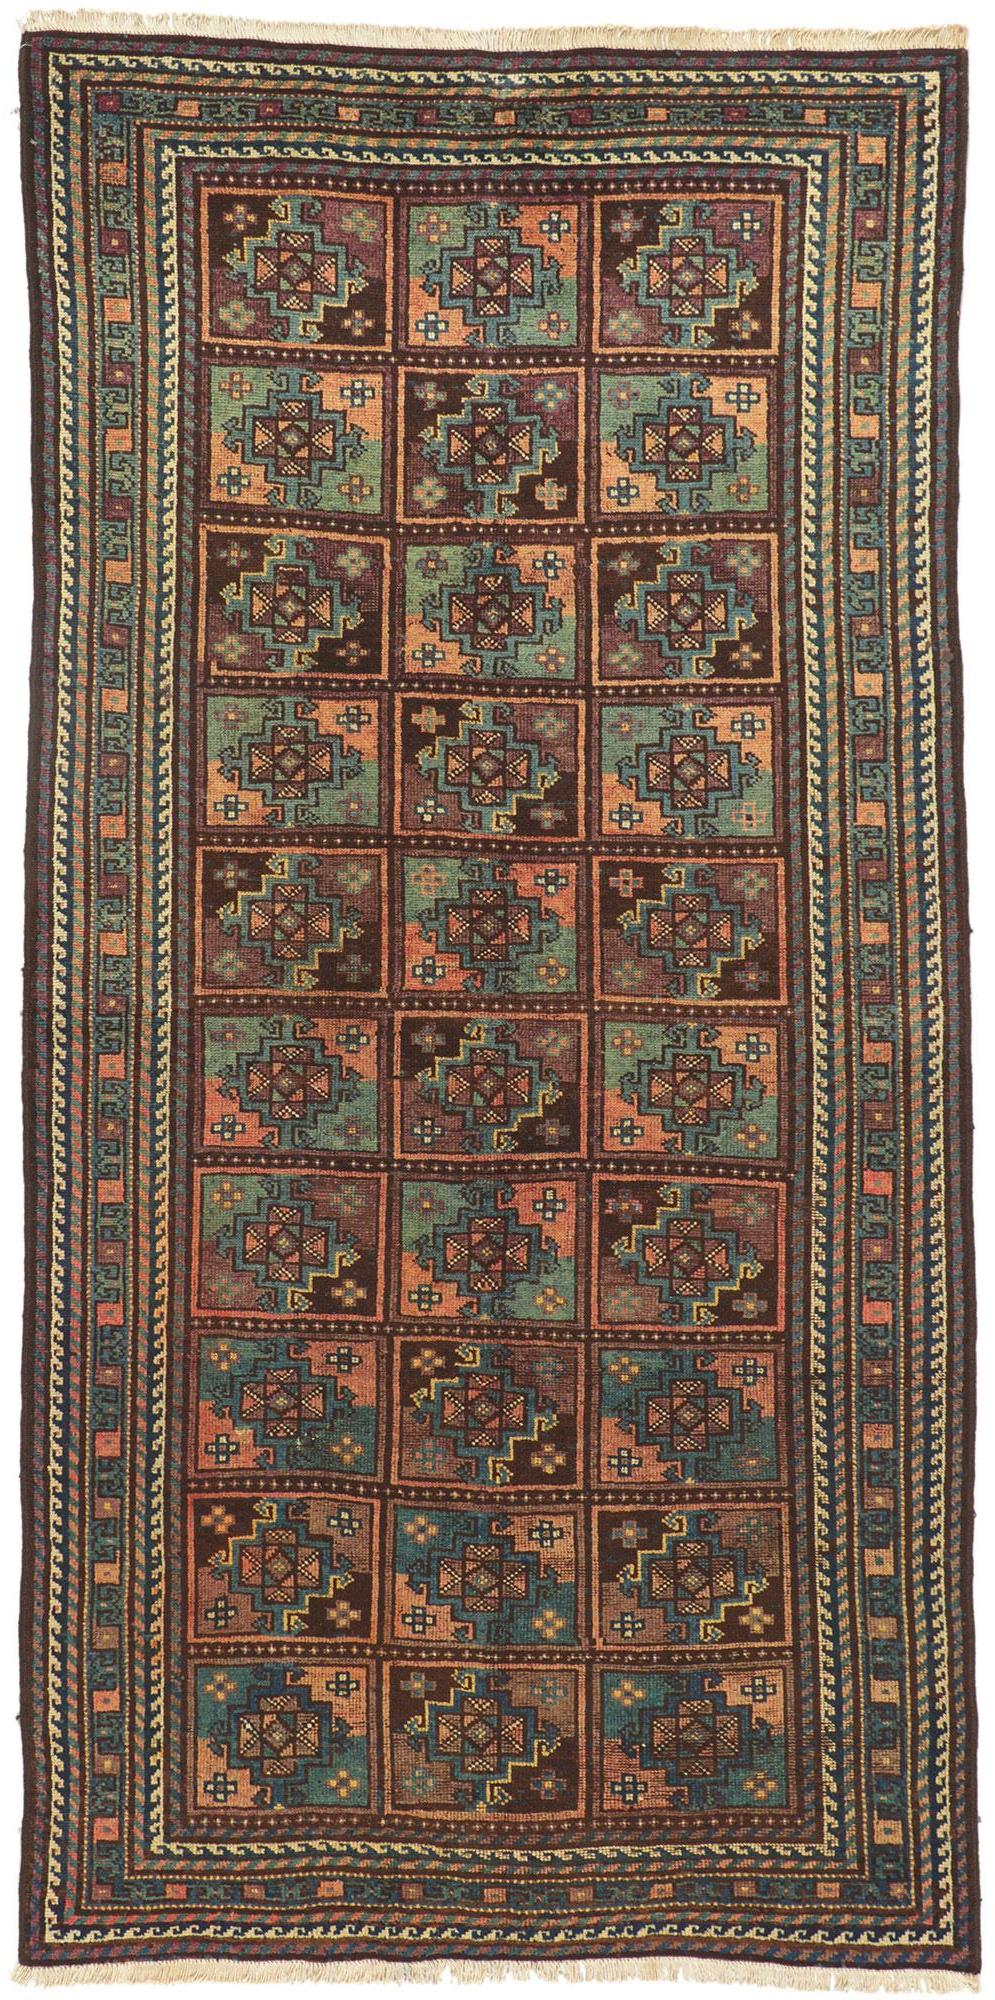 Vintage Shiraz Persian Rug with Mid-Century Modern Tribal Style 6